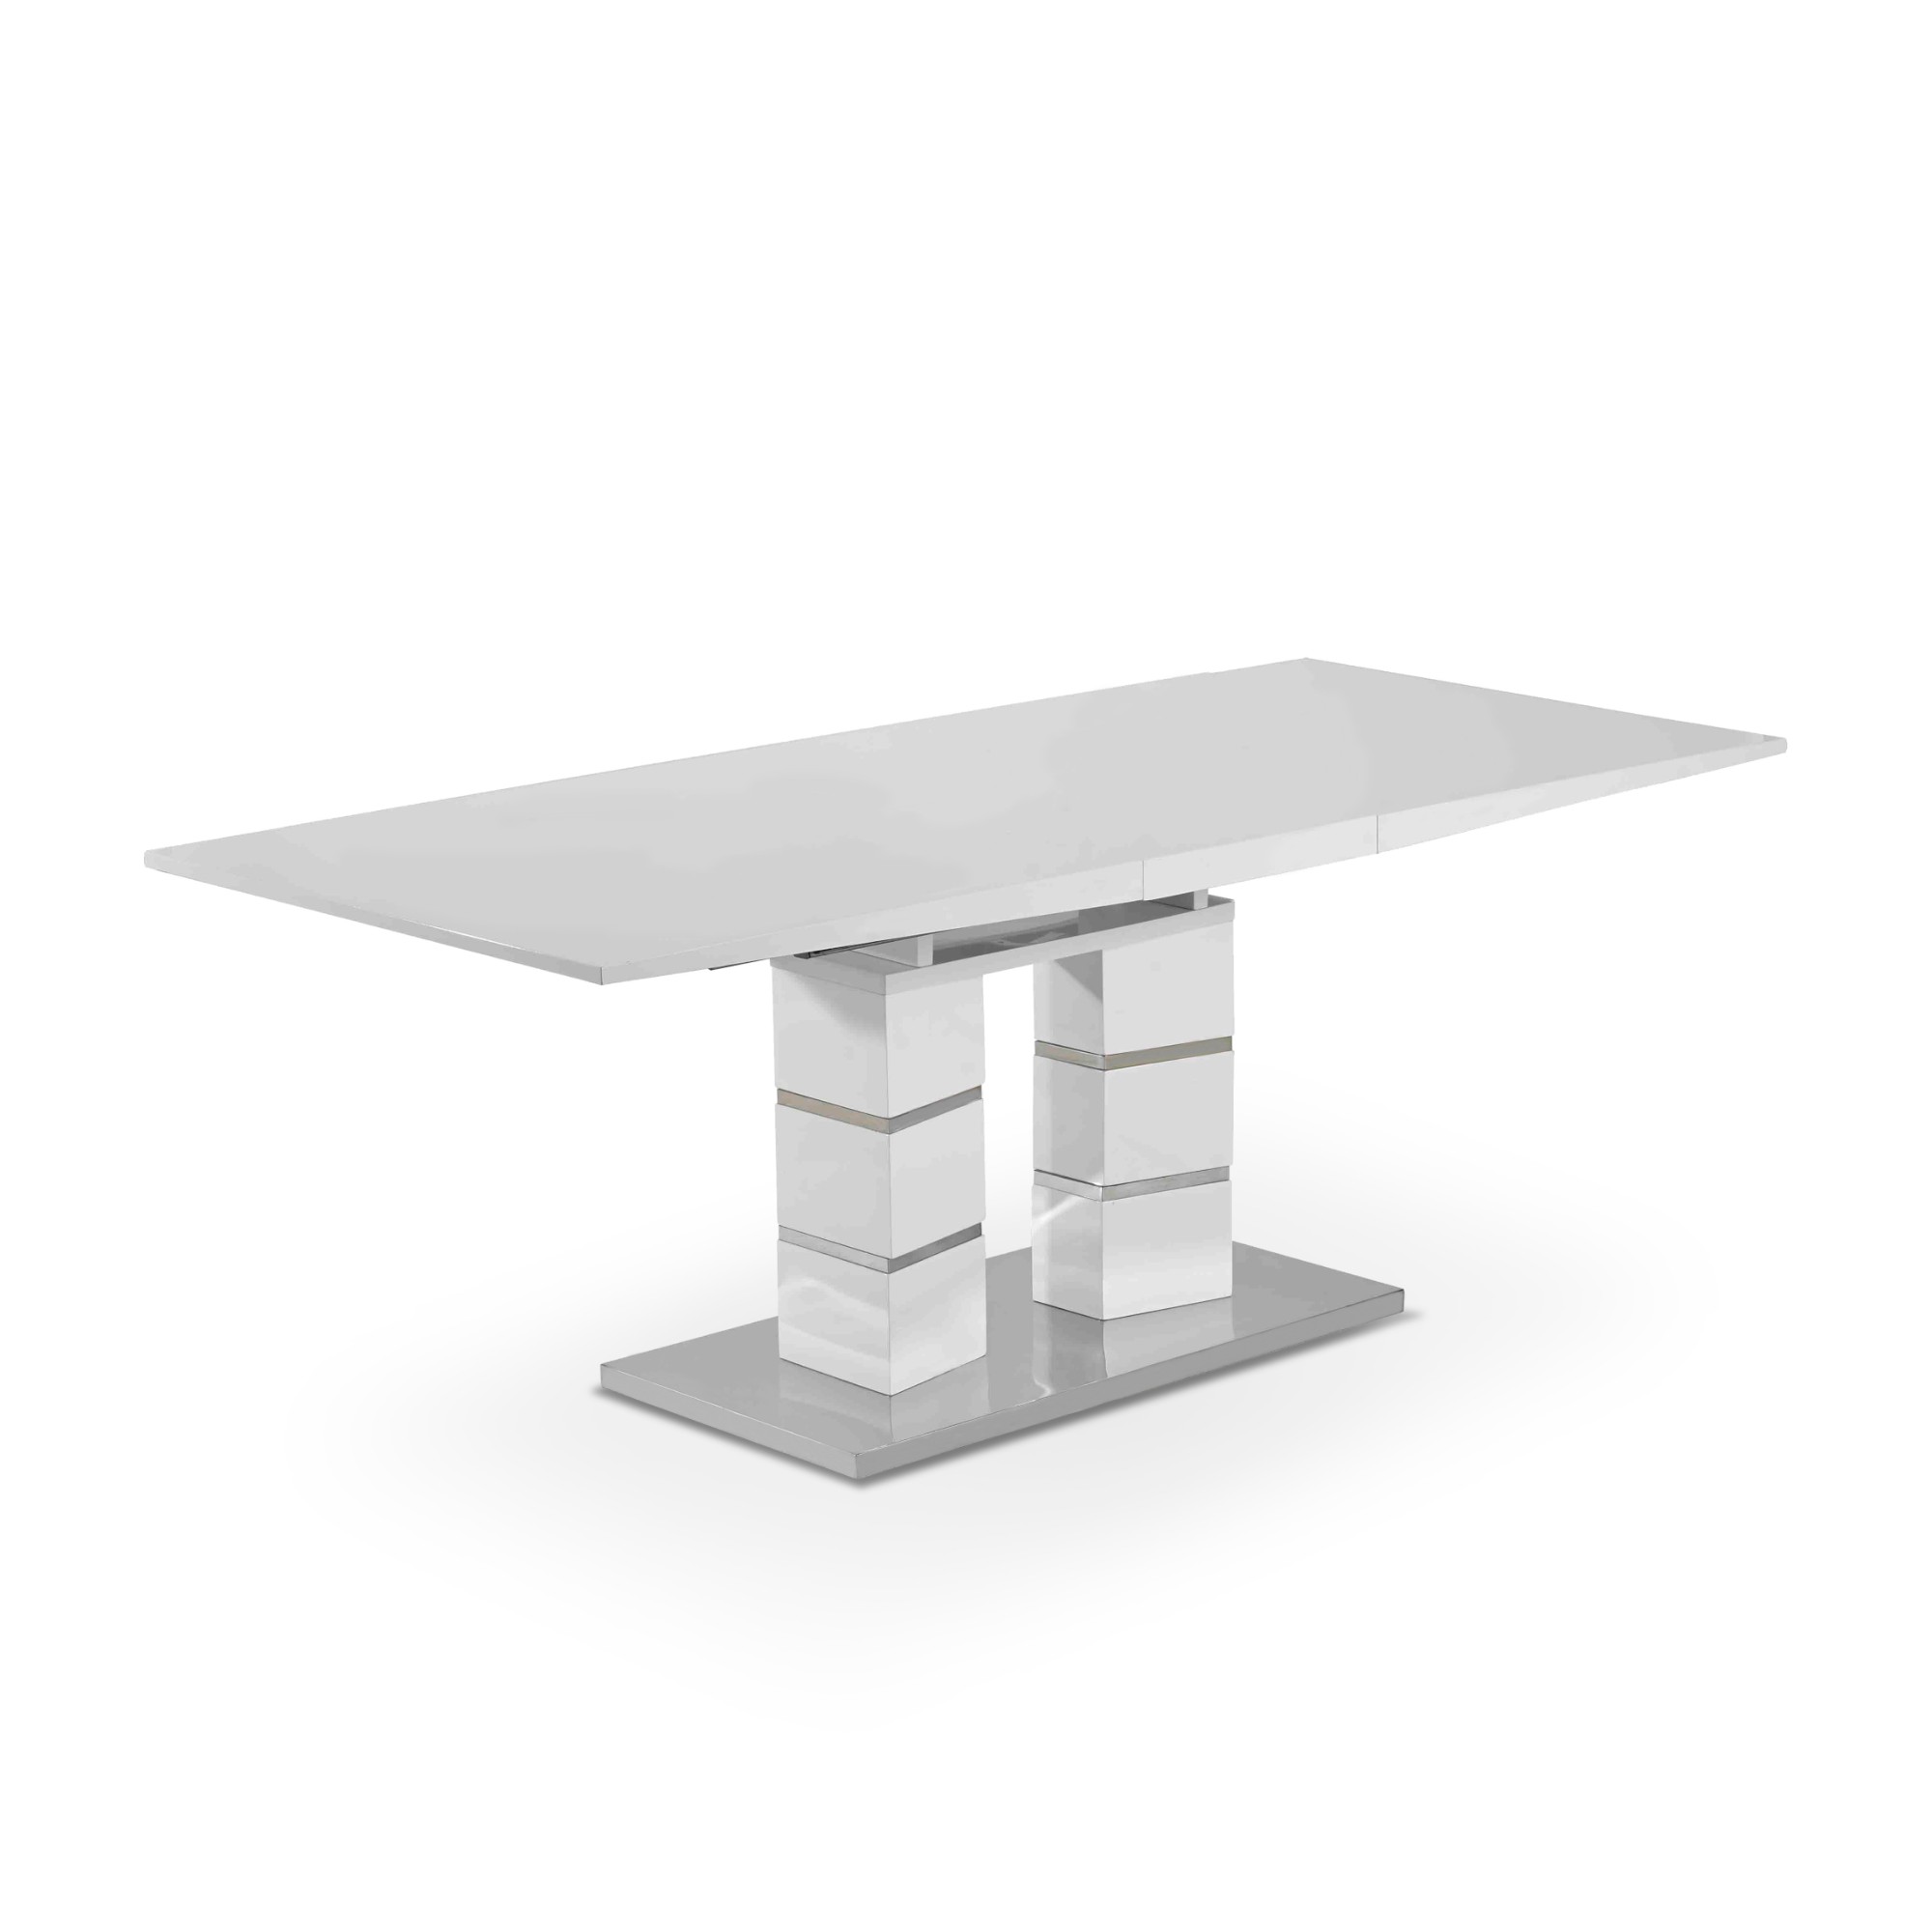 DT-9152G Italian Modern MDF Butterfly Extension High Gloss Table